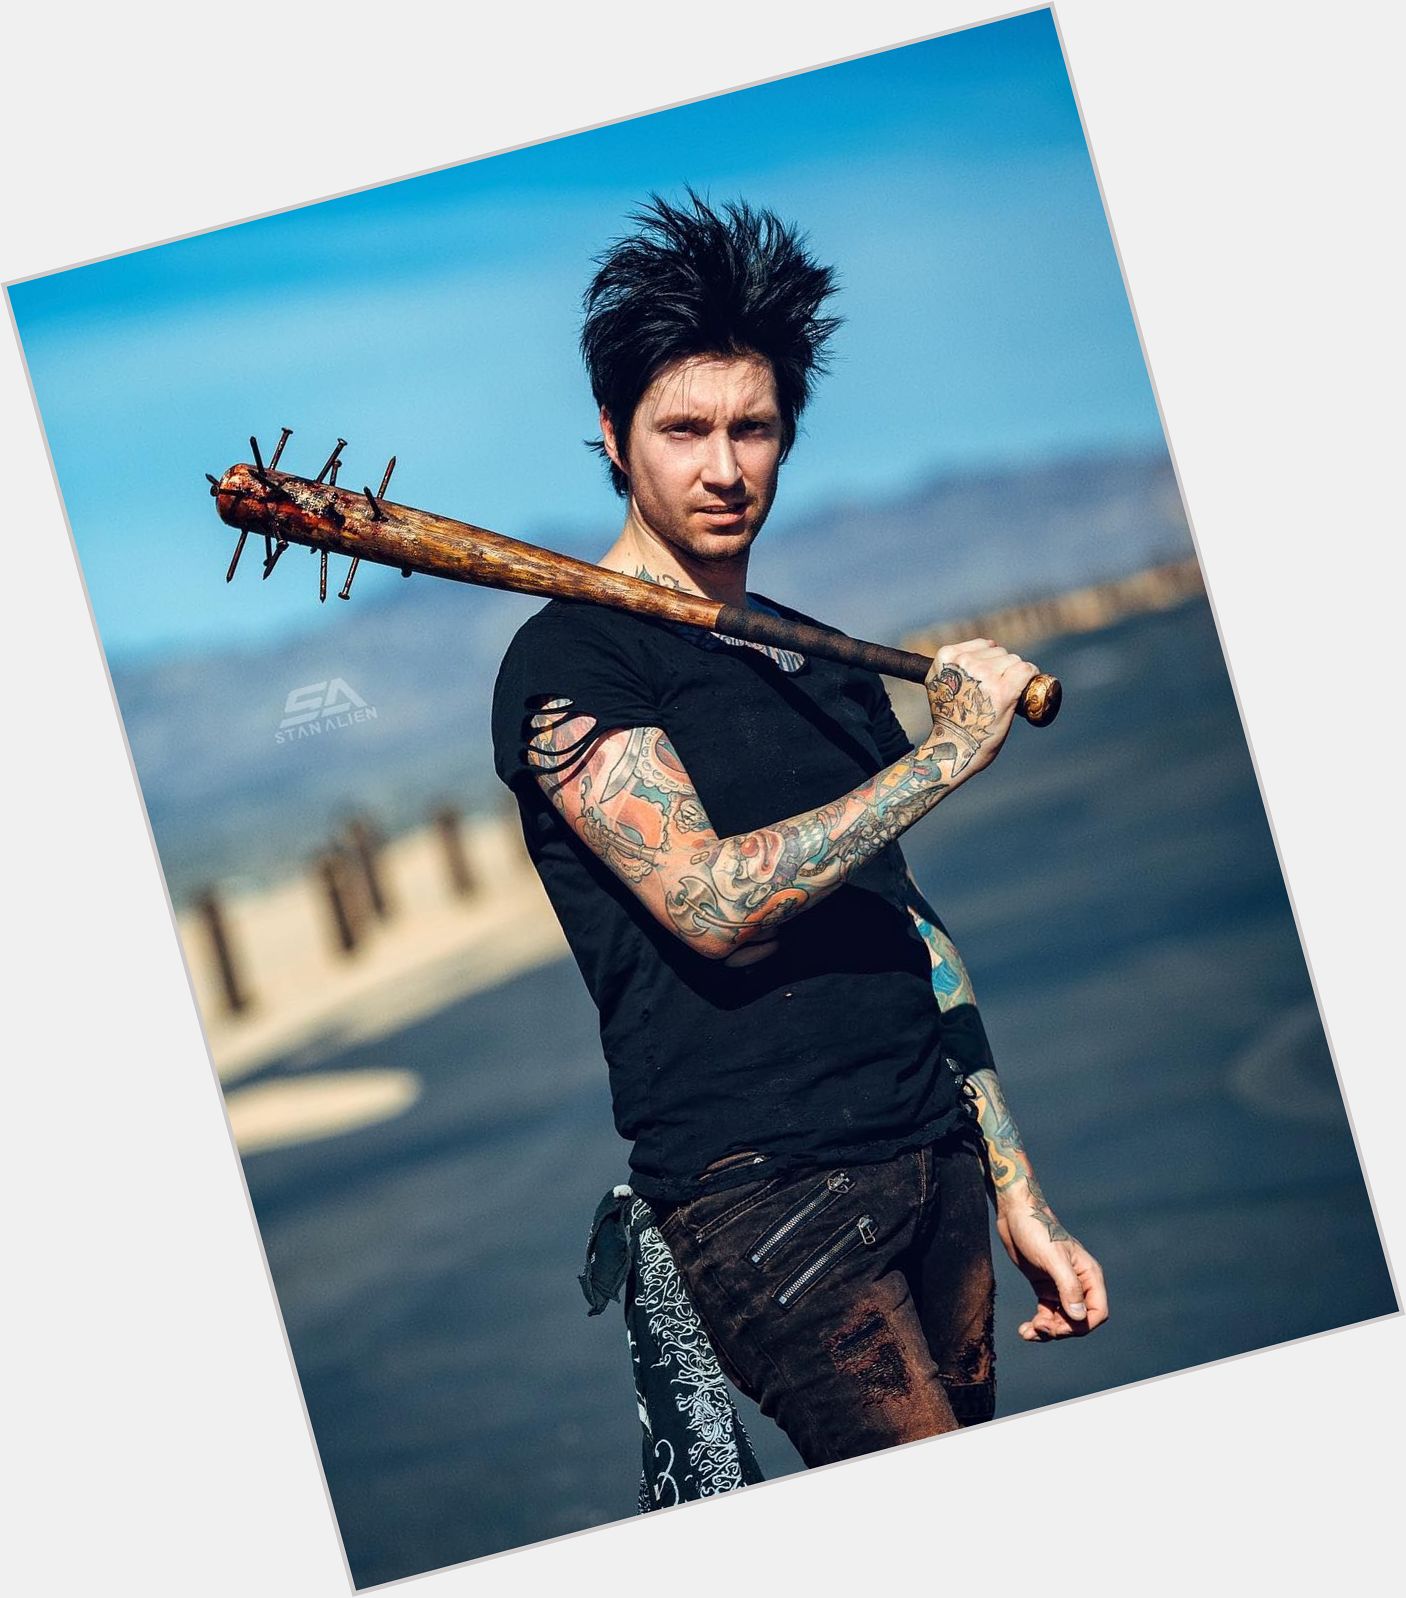 <a href="/hot-men/jake-pitts/is-he-married-mom-single-satanist-engaged-still">Jake Pitts</a> Slim body,  black hair & hairstyles